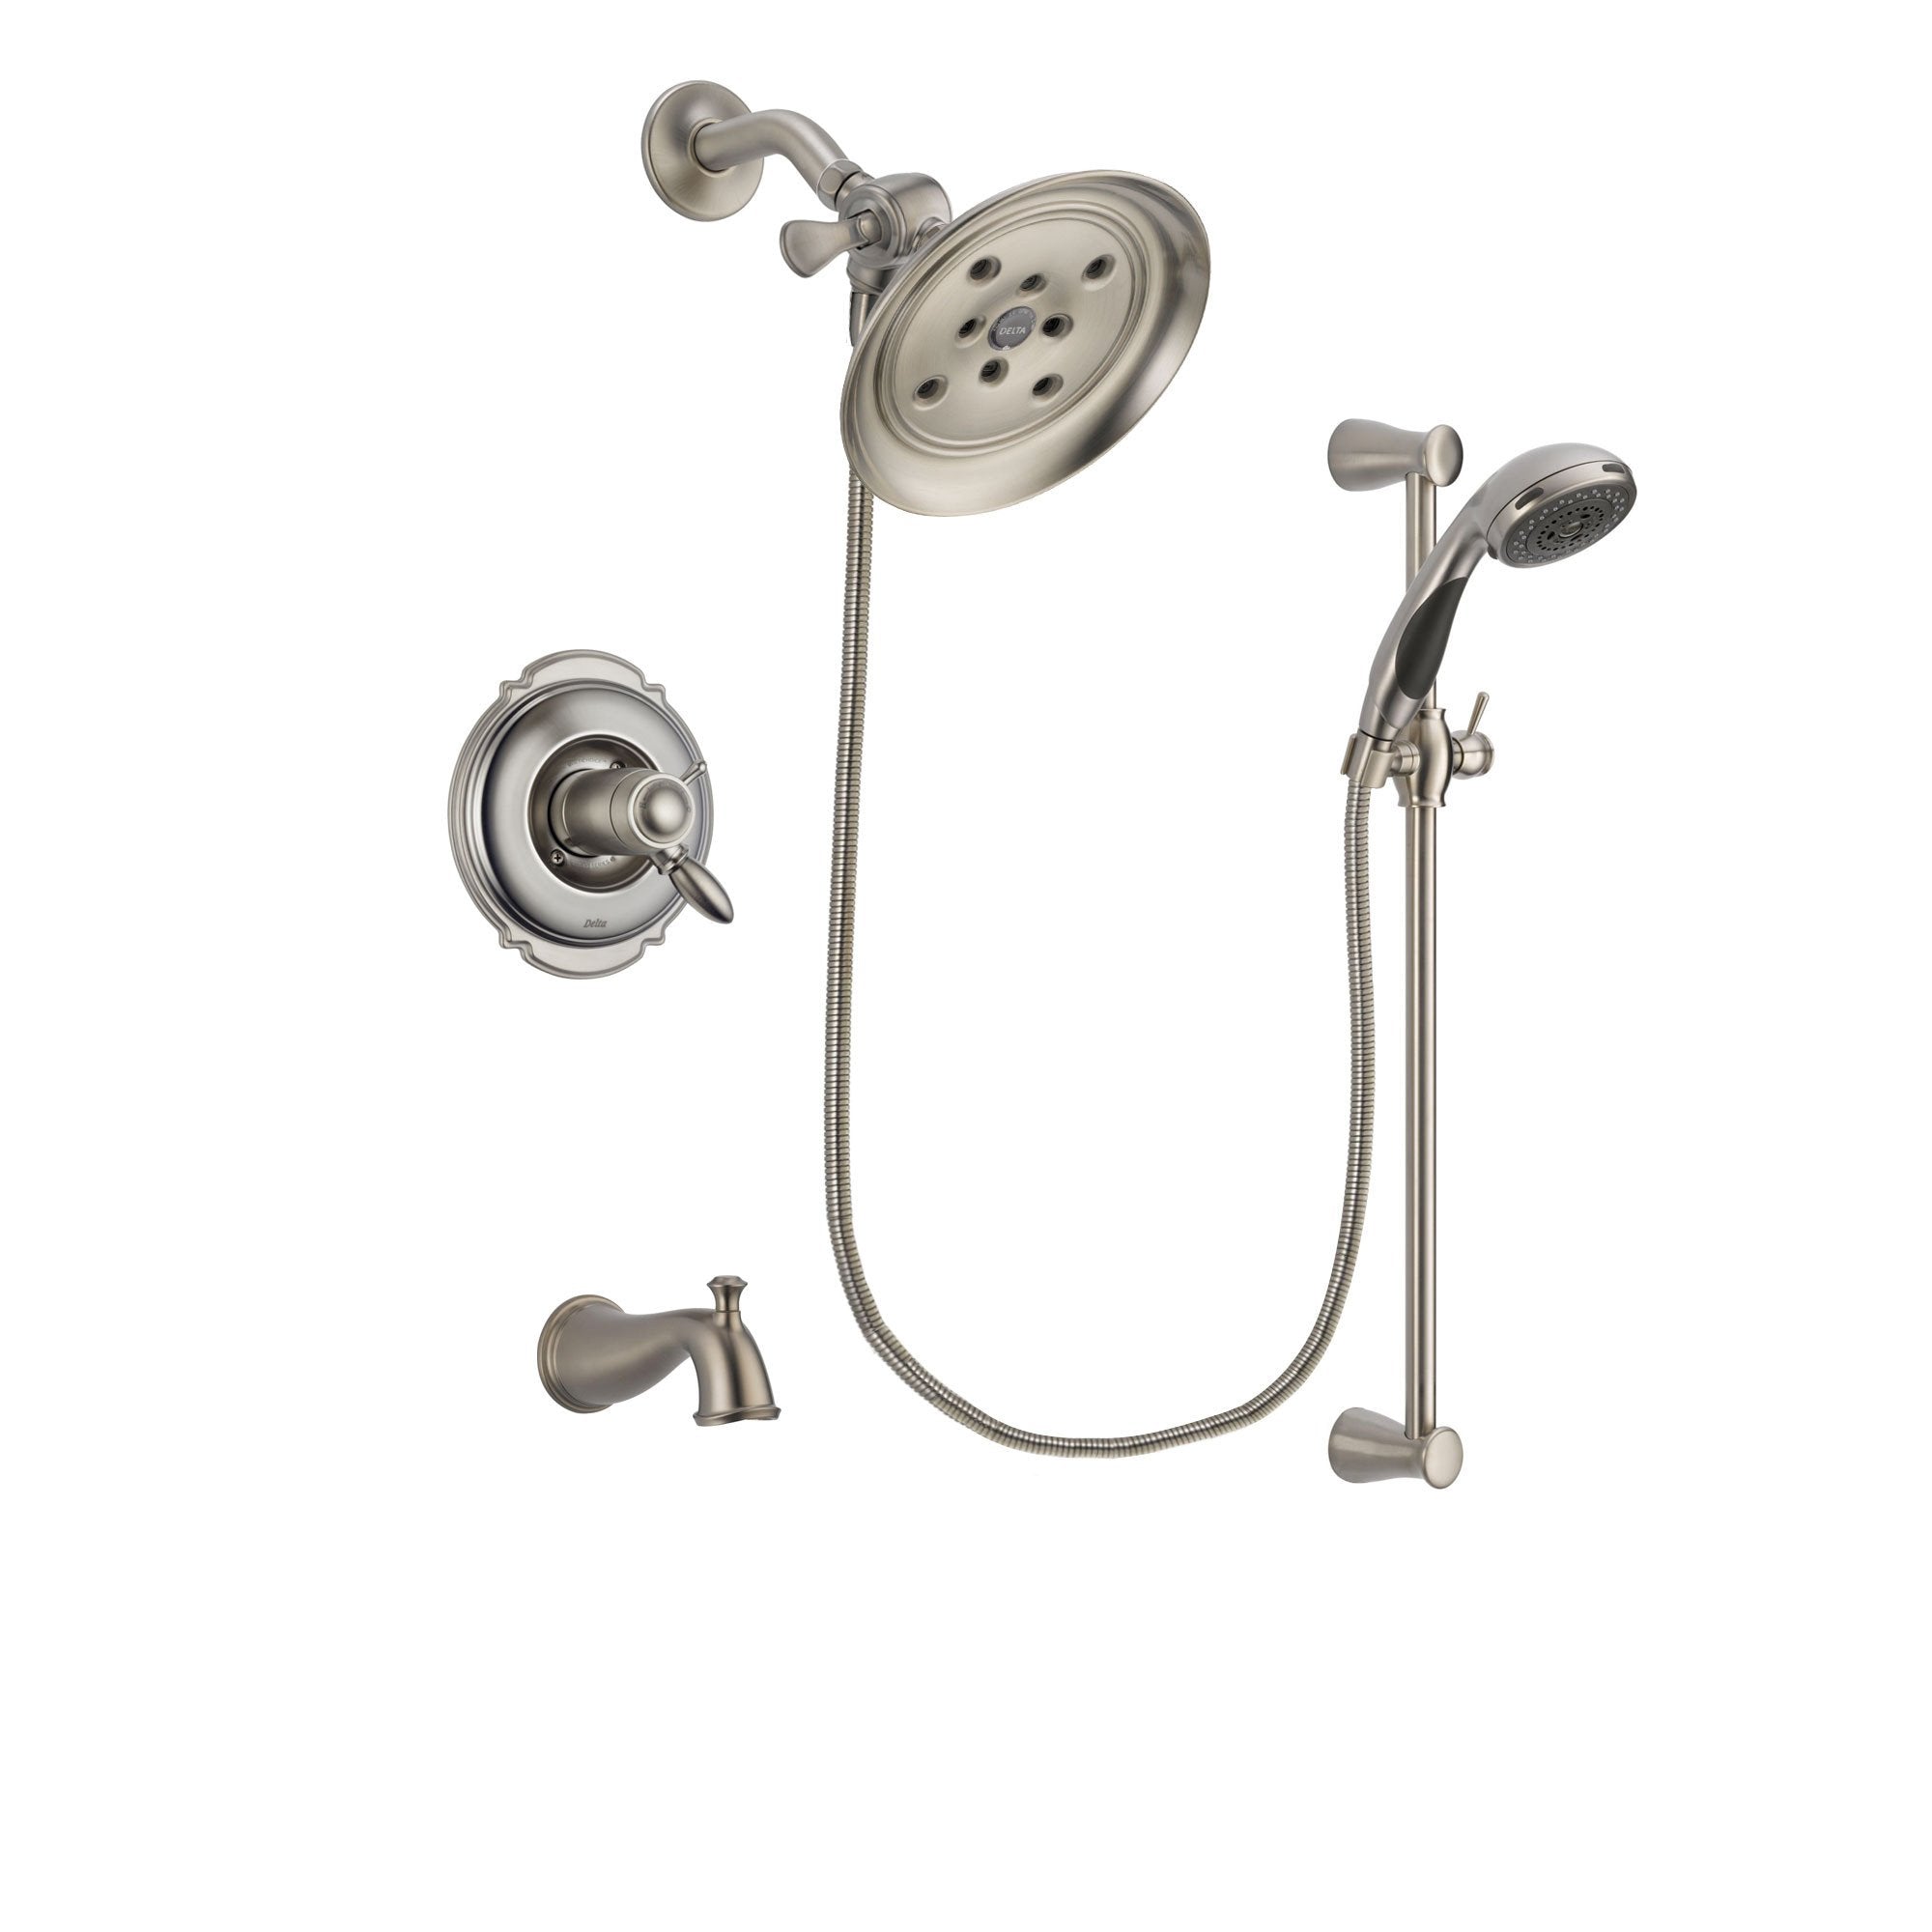 Delta Victorian Stainless Steel Finish Tub & Shower System w/Hand Spray DSP1583V